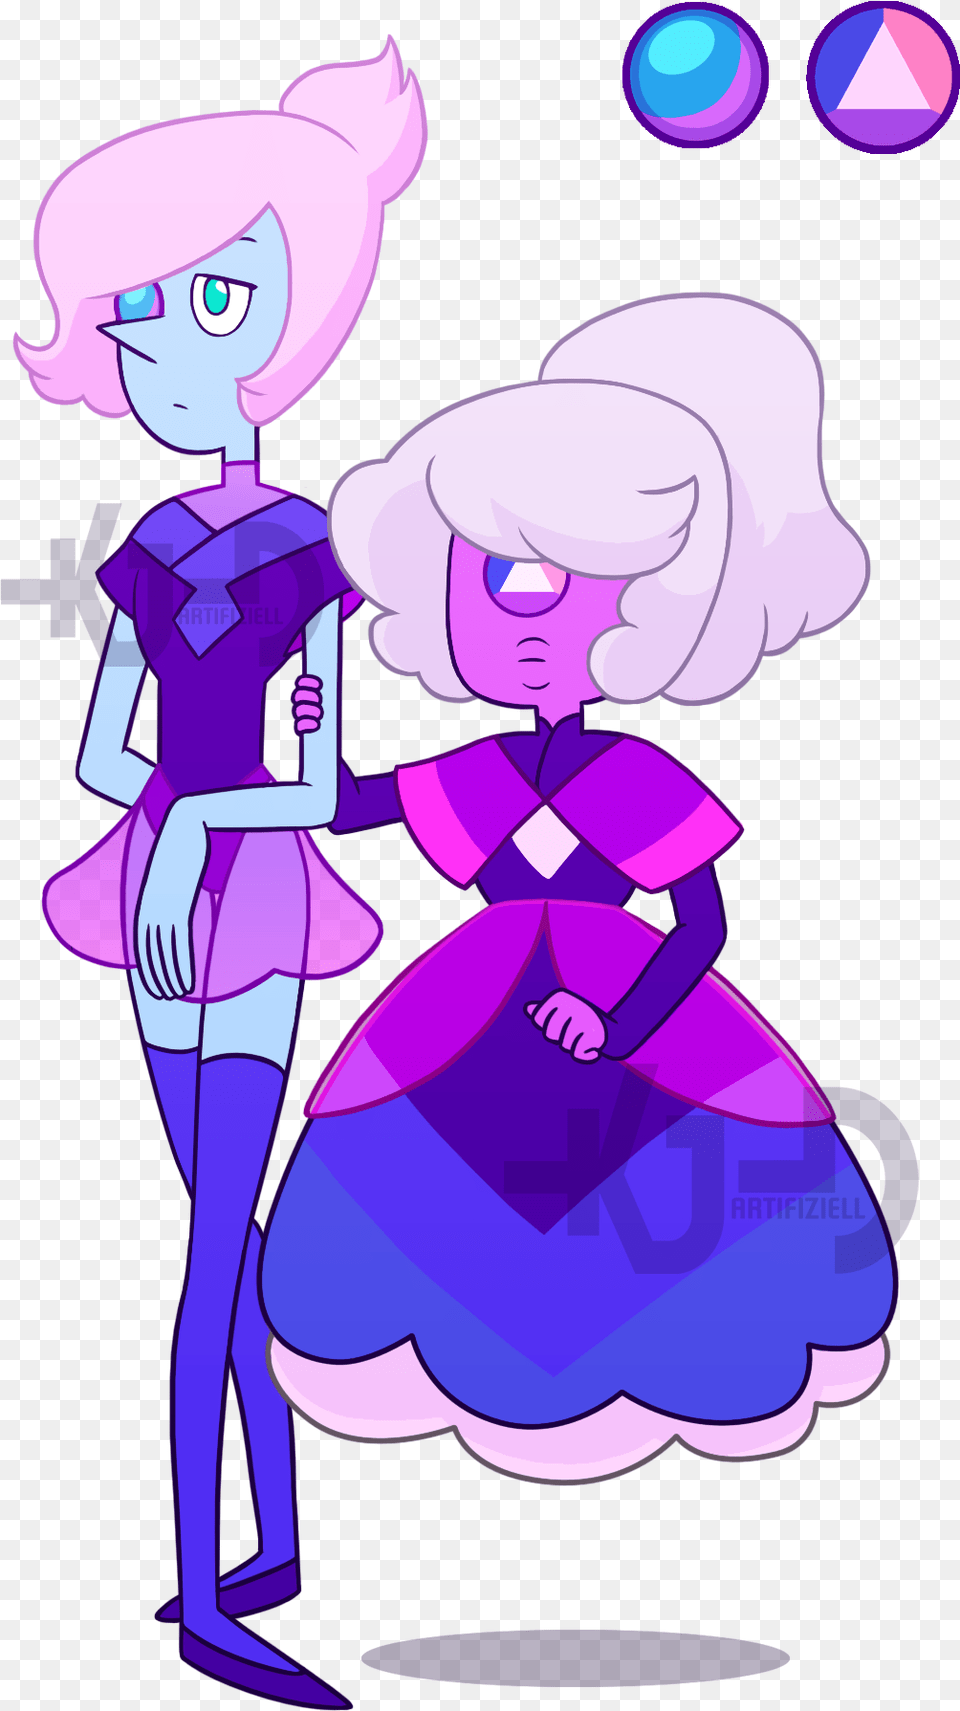 Pin By Princesa Laia On King Sombra And Rarity Steven Universe Winza Sapphire, Purple, Book, Comics, Publication Free Transparent Png